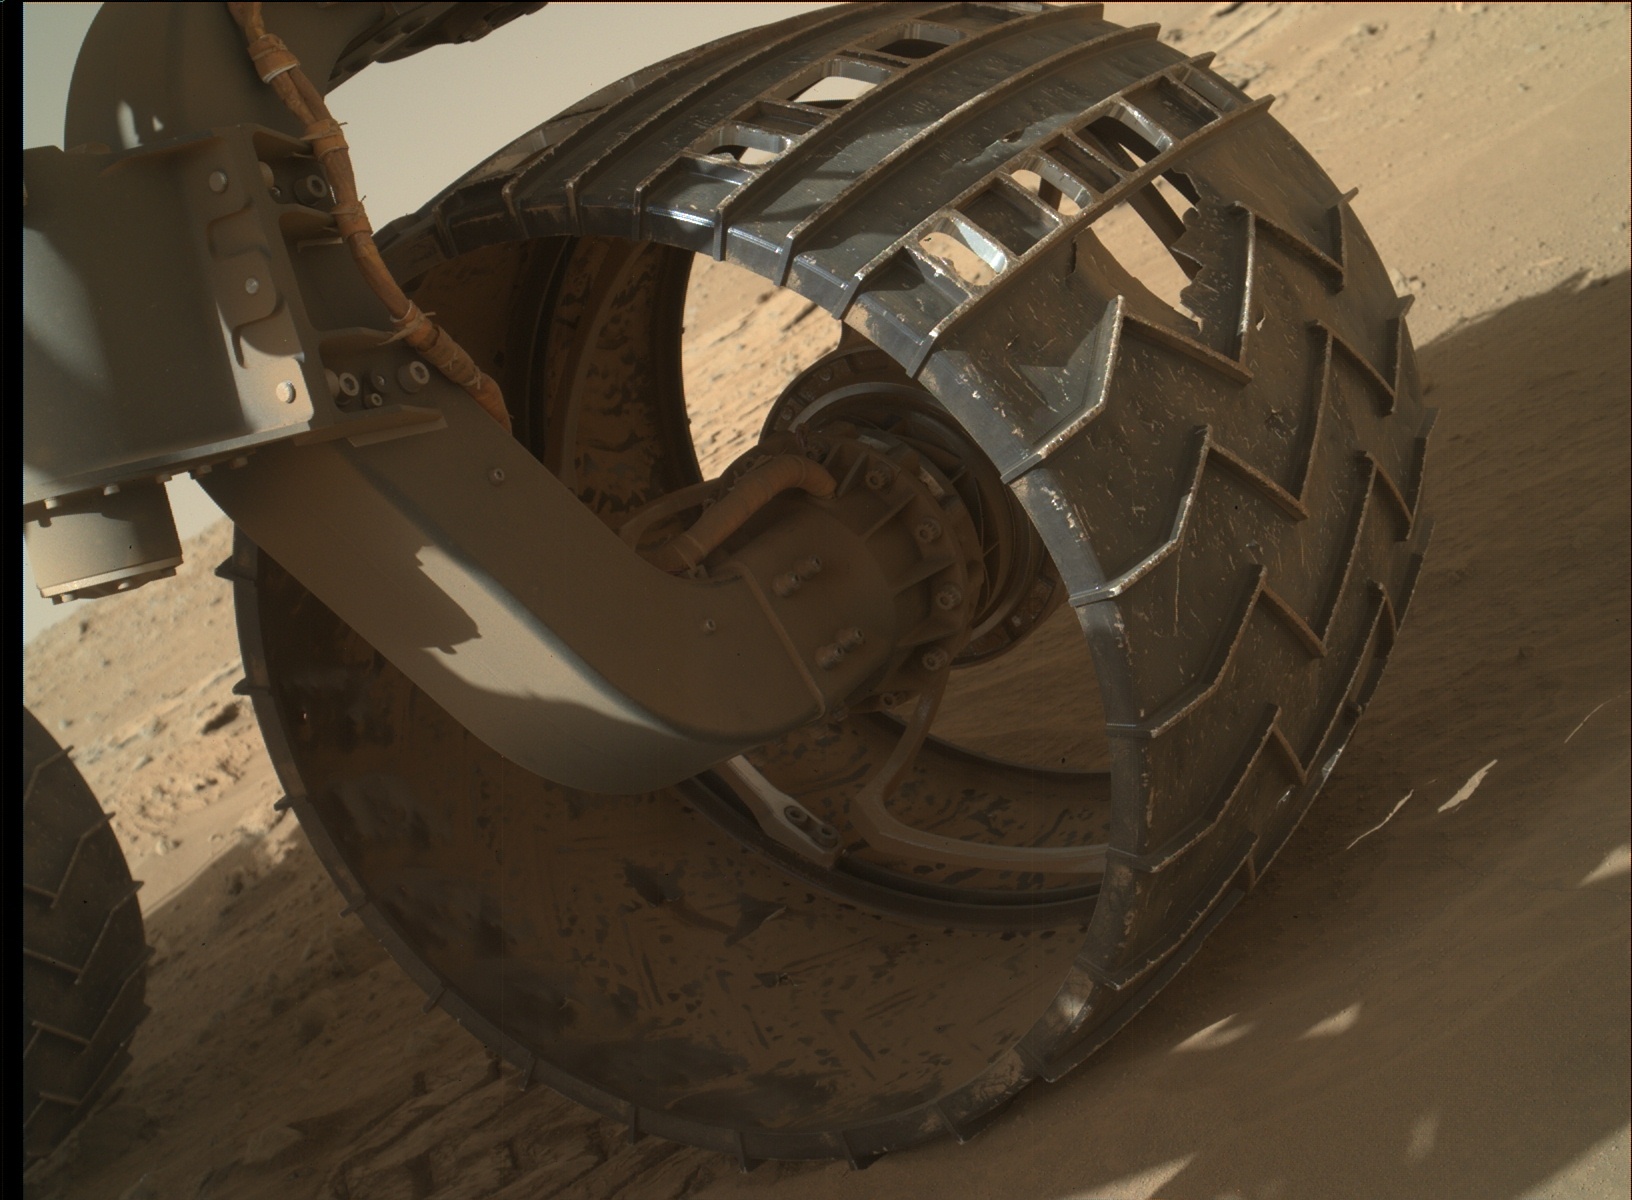 Nasa's Mars rover Curiosity acquired this image using its Mars Hand Lens Imager (MAHLI) on Sol 605